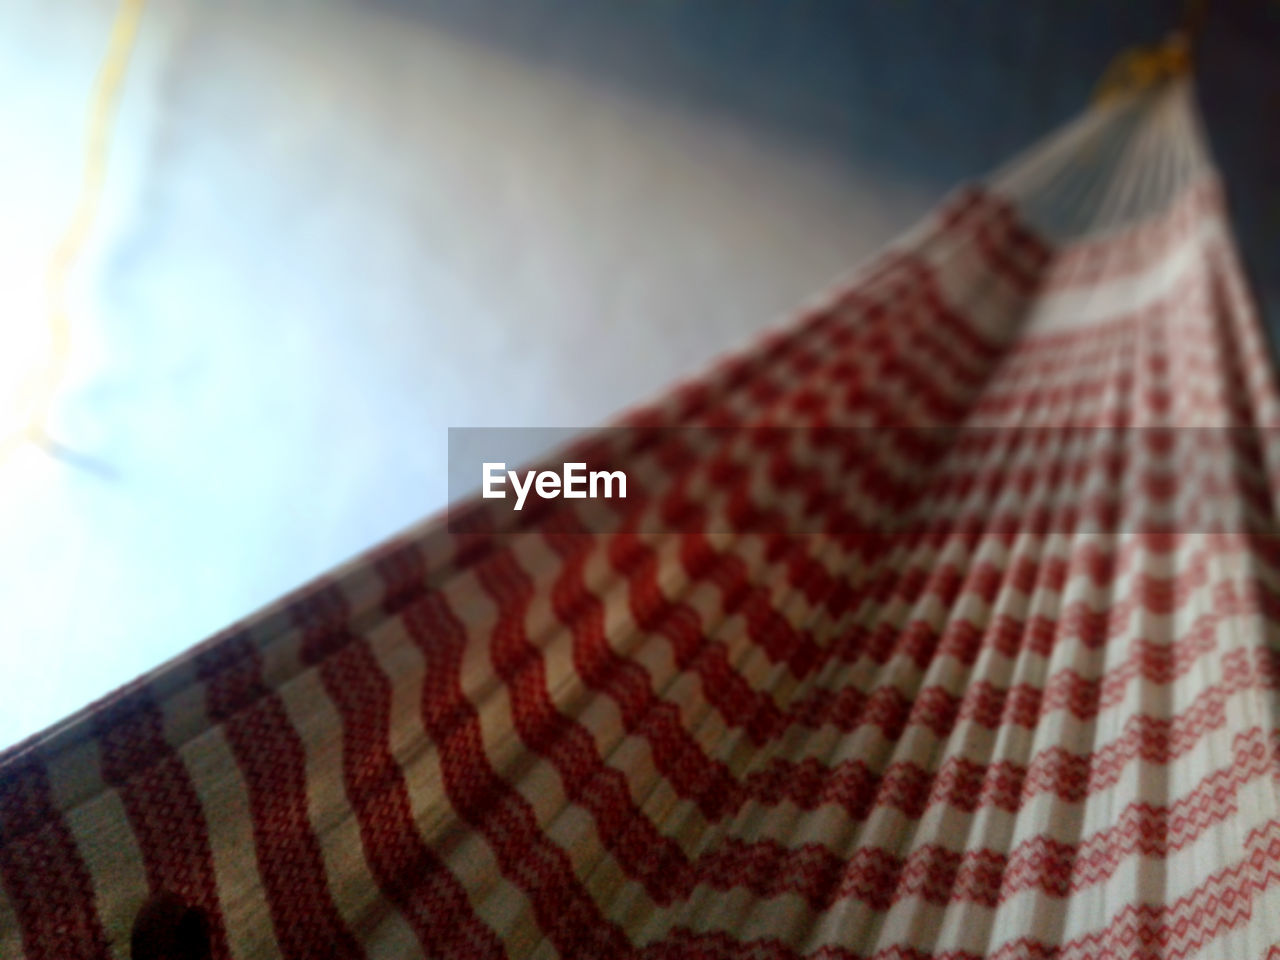 VIEW OF FABRIC